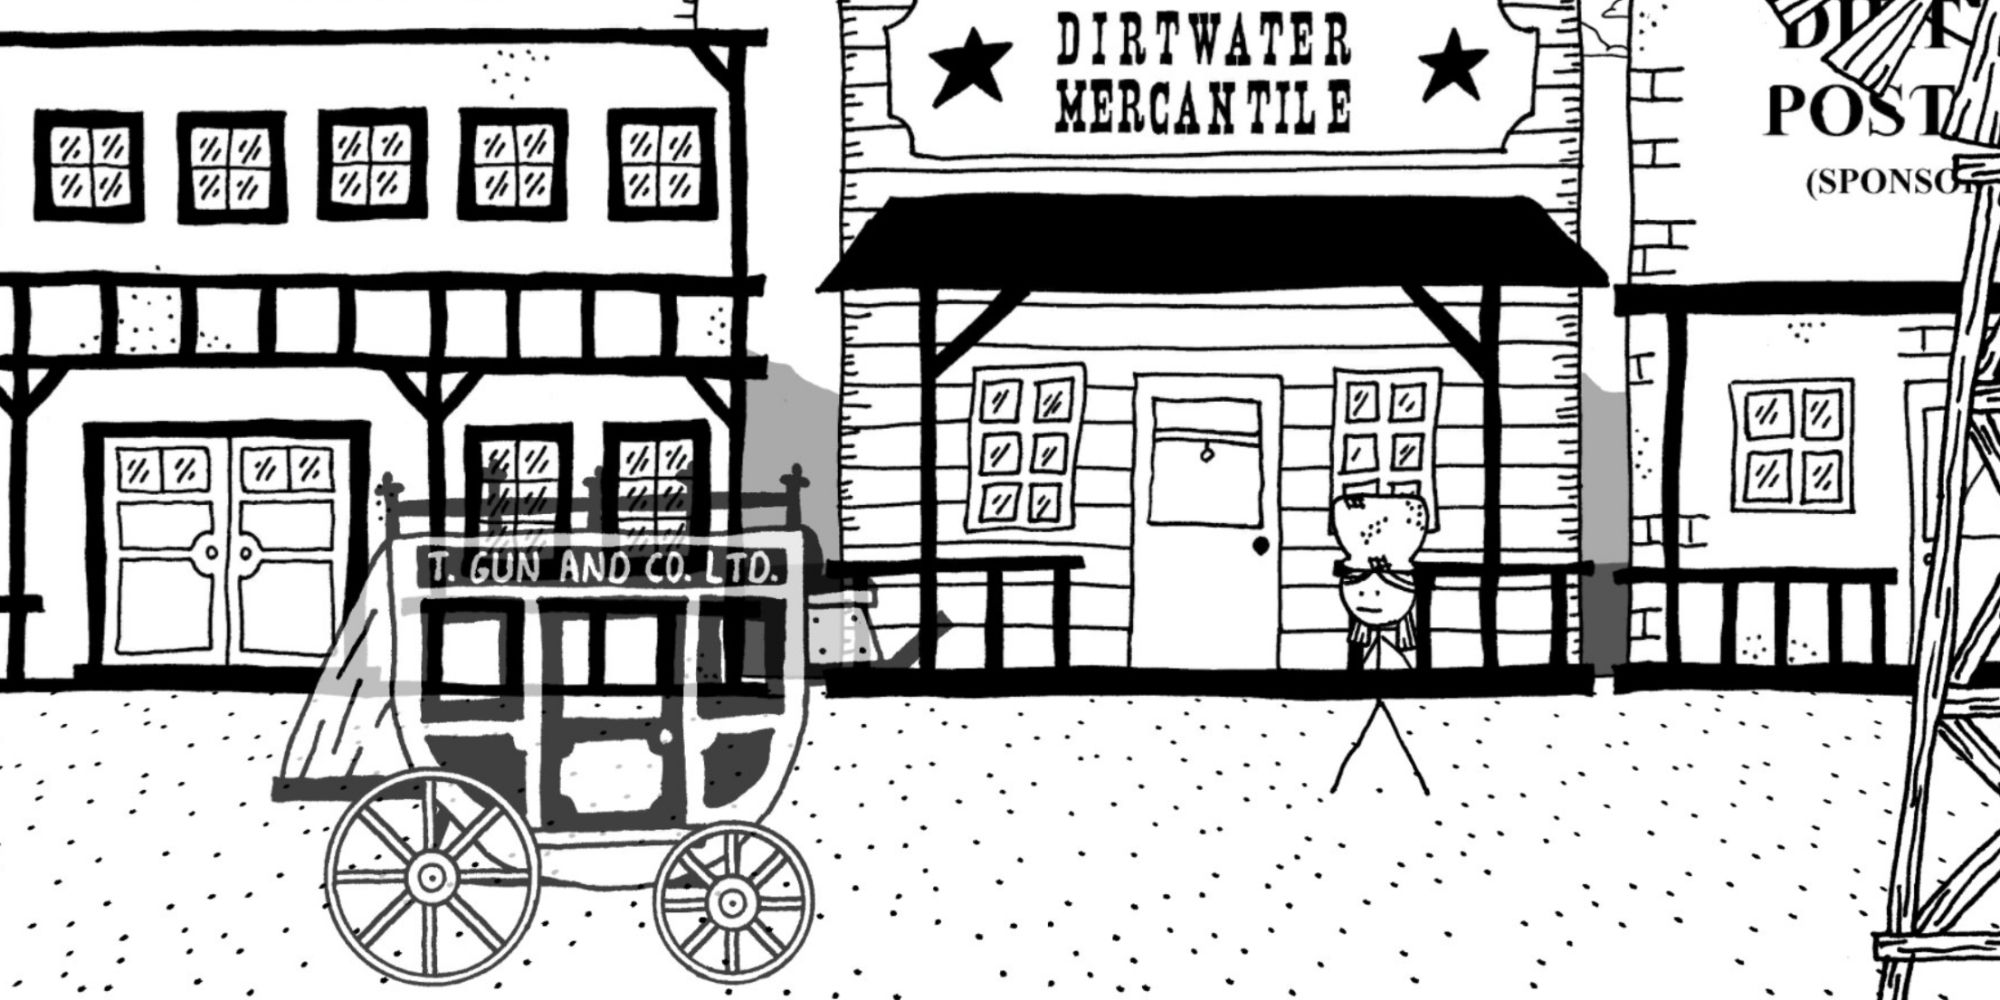 Dirtwater Mercantile exterior west of laothing